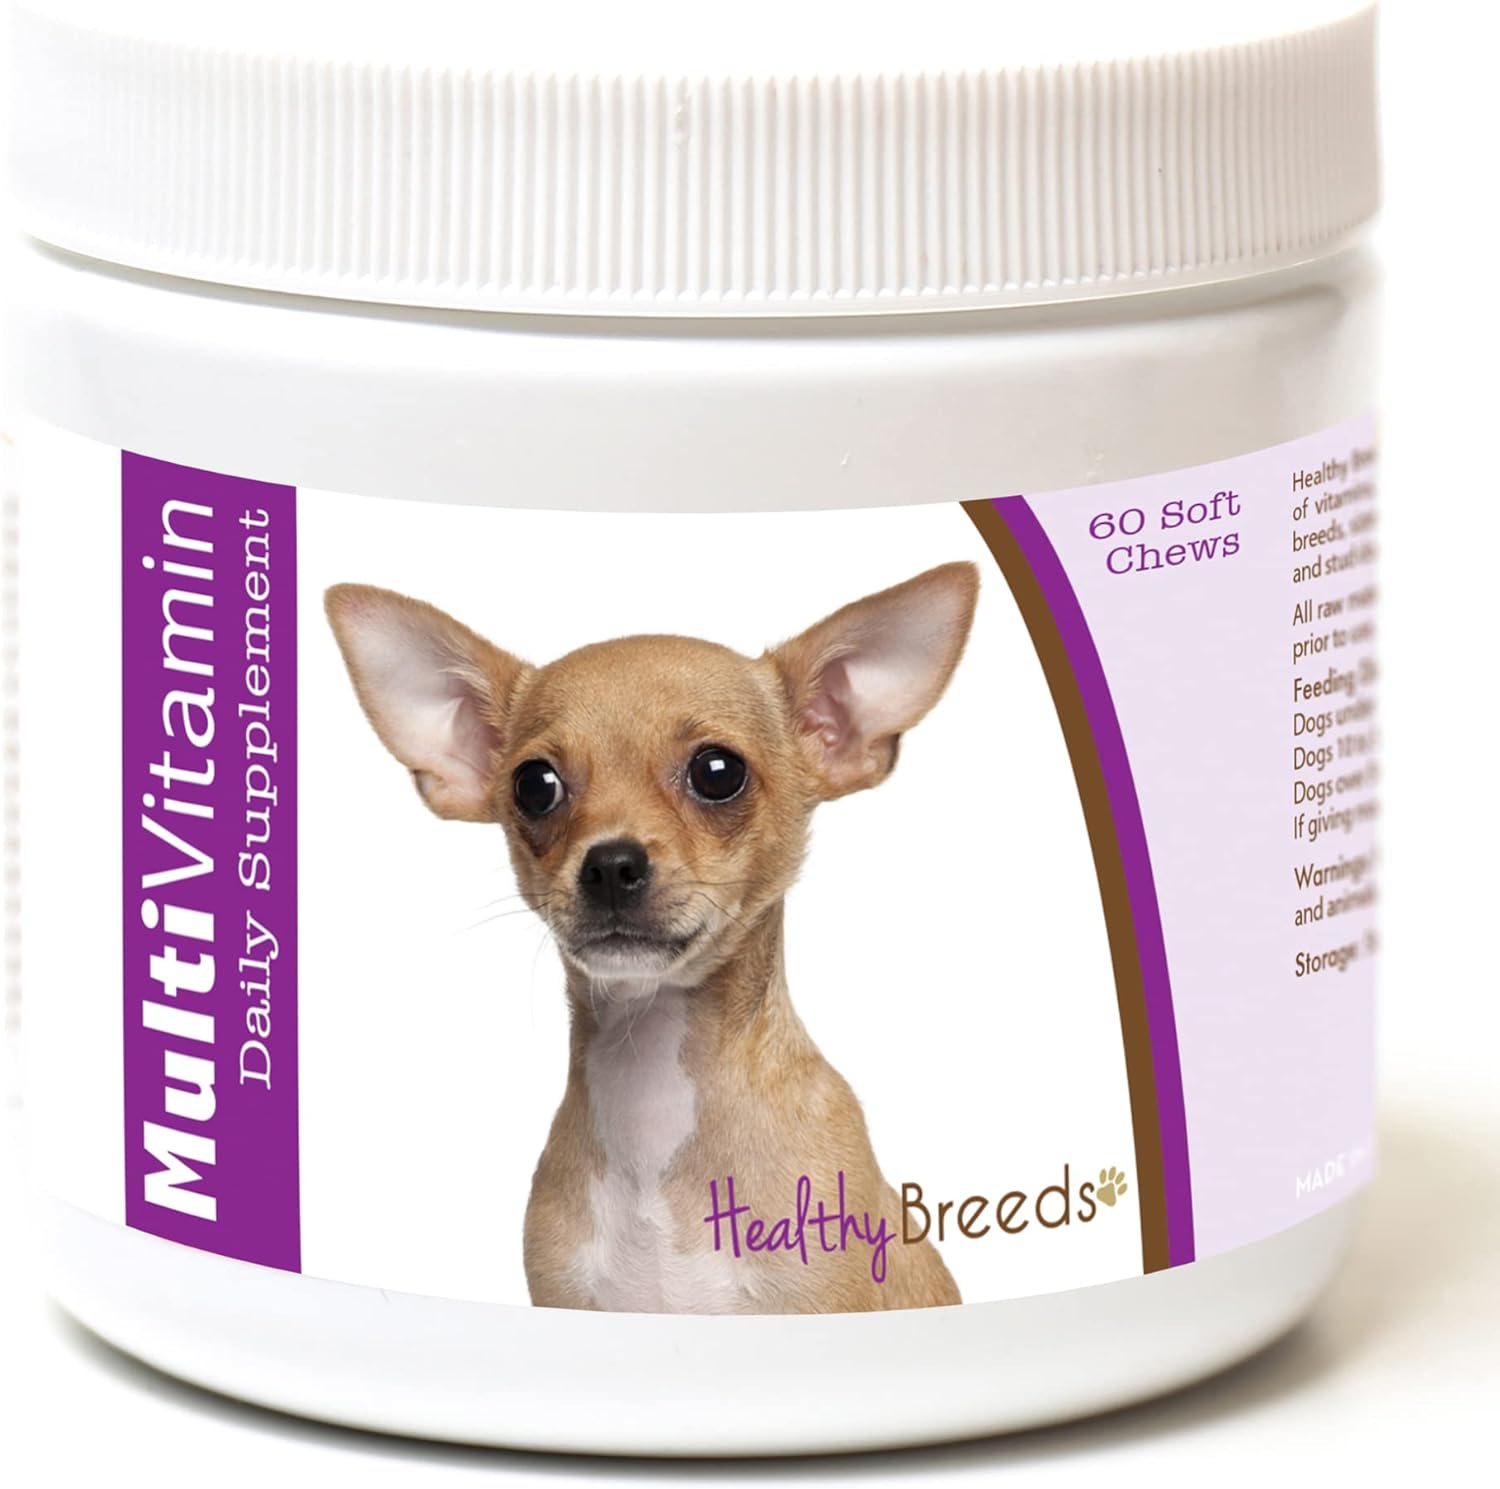 Healthy Breeds Chihuahua Multi-Vitamin Soft Chews 60 Count